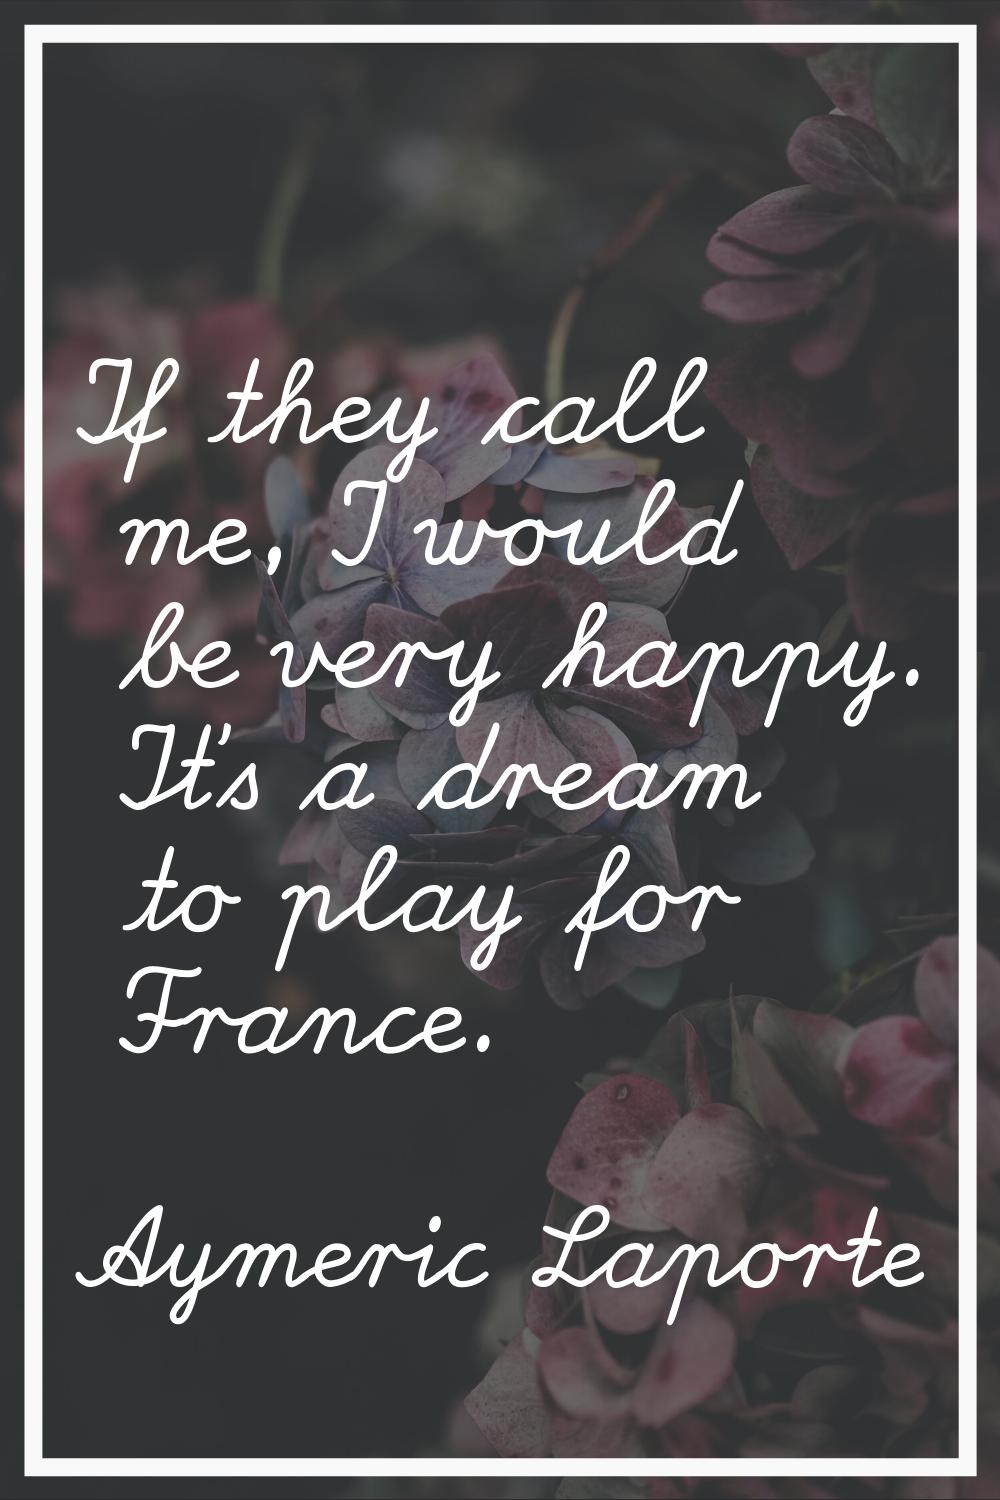 If they call me, I would be very happy. It's a dream to play for France.